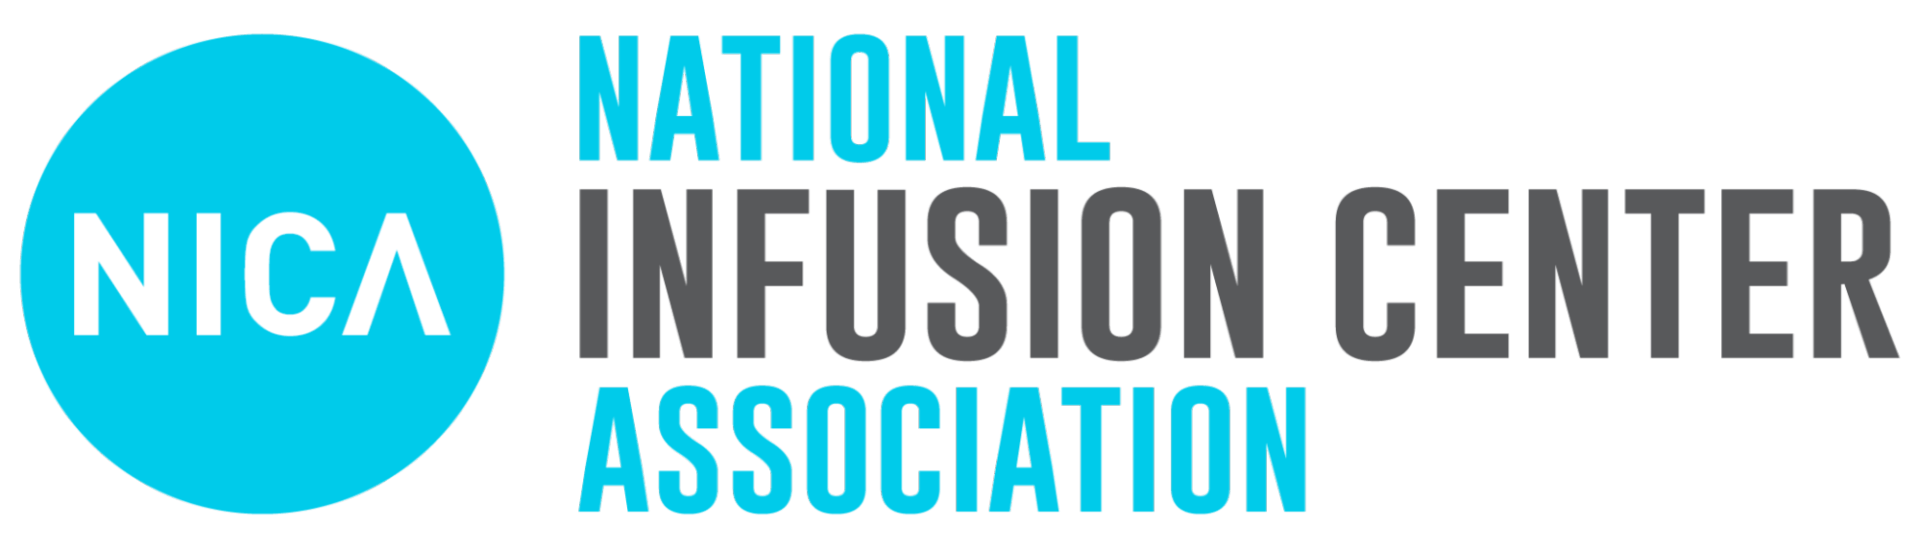 The logo for the national infusion center association is blue and black.